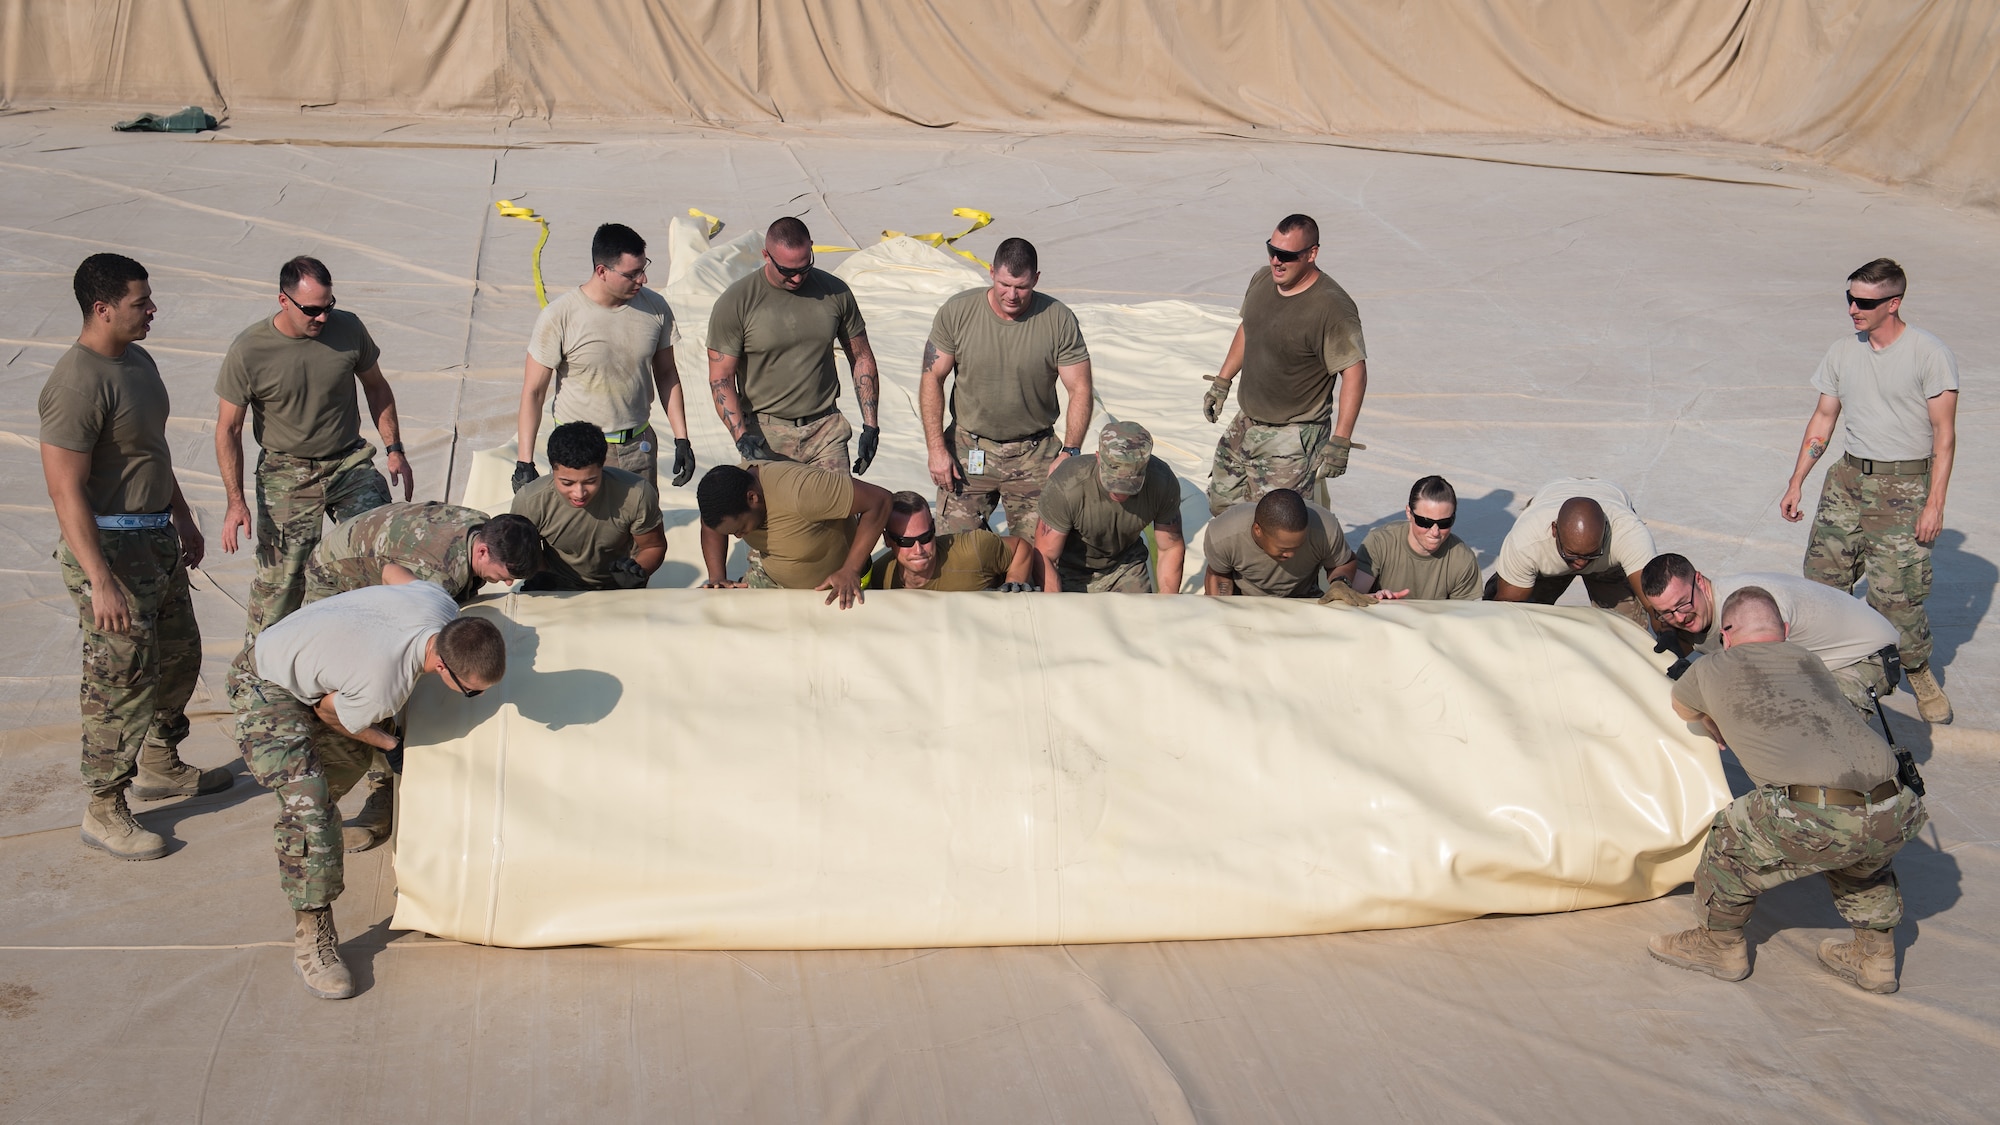 U.S. Air Force Airmen, from the 386th Expeditionary Logistics Readiness Squadron fuels management flight, work together to unroll a new empty fuel bladder at Ali Al Salem Air Base, Kuwait, Oct. 7, 2019. Fuel bladders are replaced every three-to-four years after they become unserviceable. (U.S. Air Force photo by Tech. Sgt. Daniel Martinez)